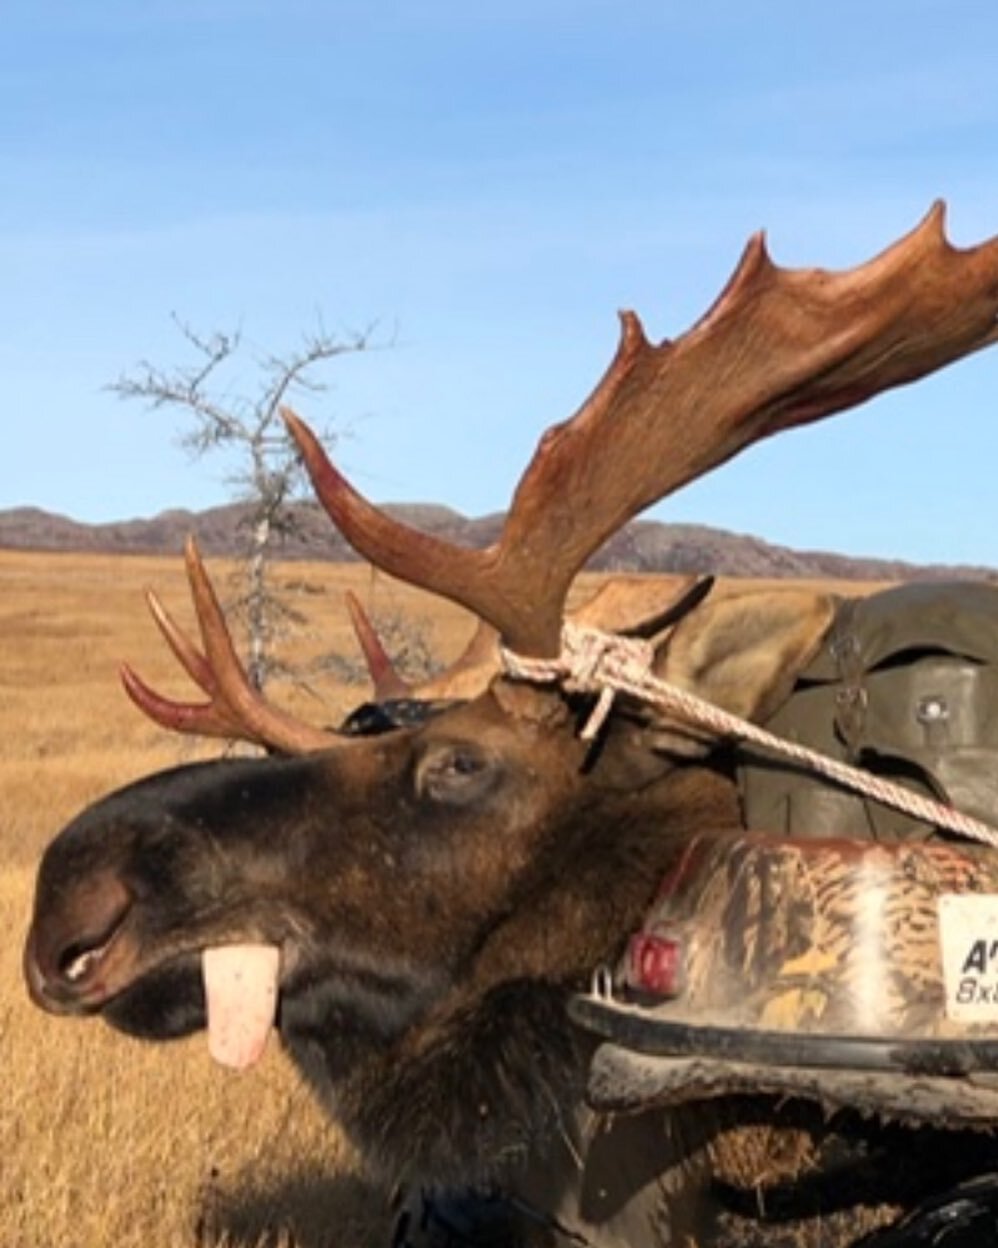 This is what we all look forward to at the end of our hunt. Another great hunt and happy Hunter! Contact us at Marchandmillco@gmail.com to come for a Moose, Caribou or bear hunt!